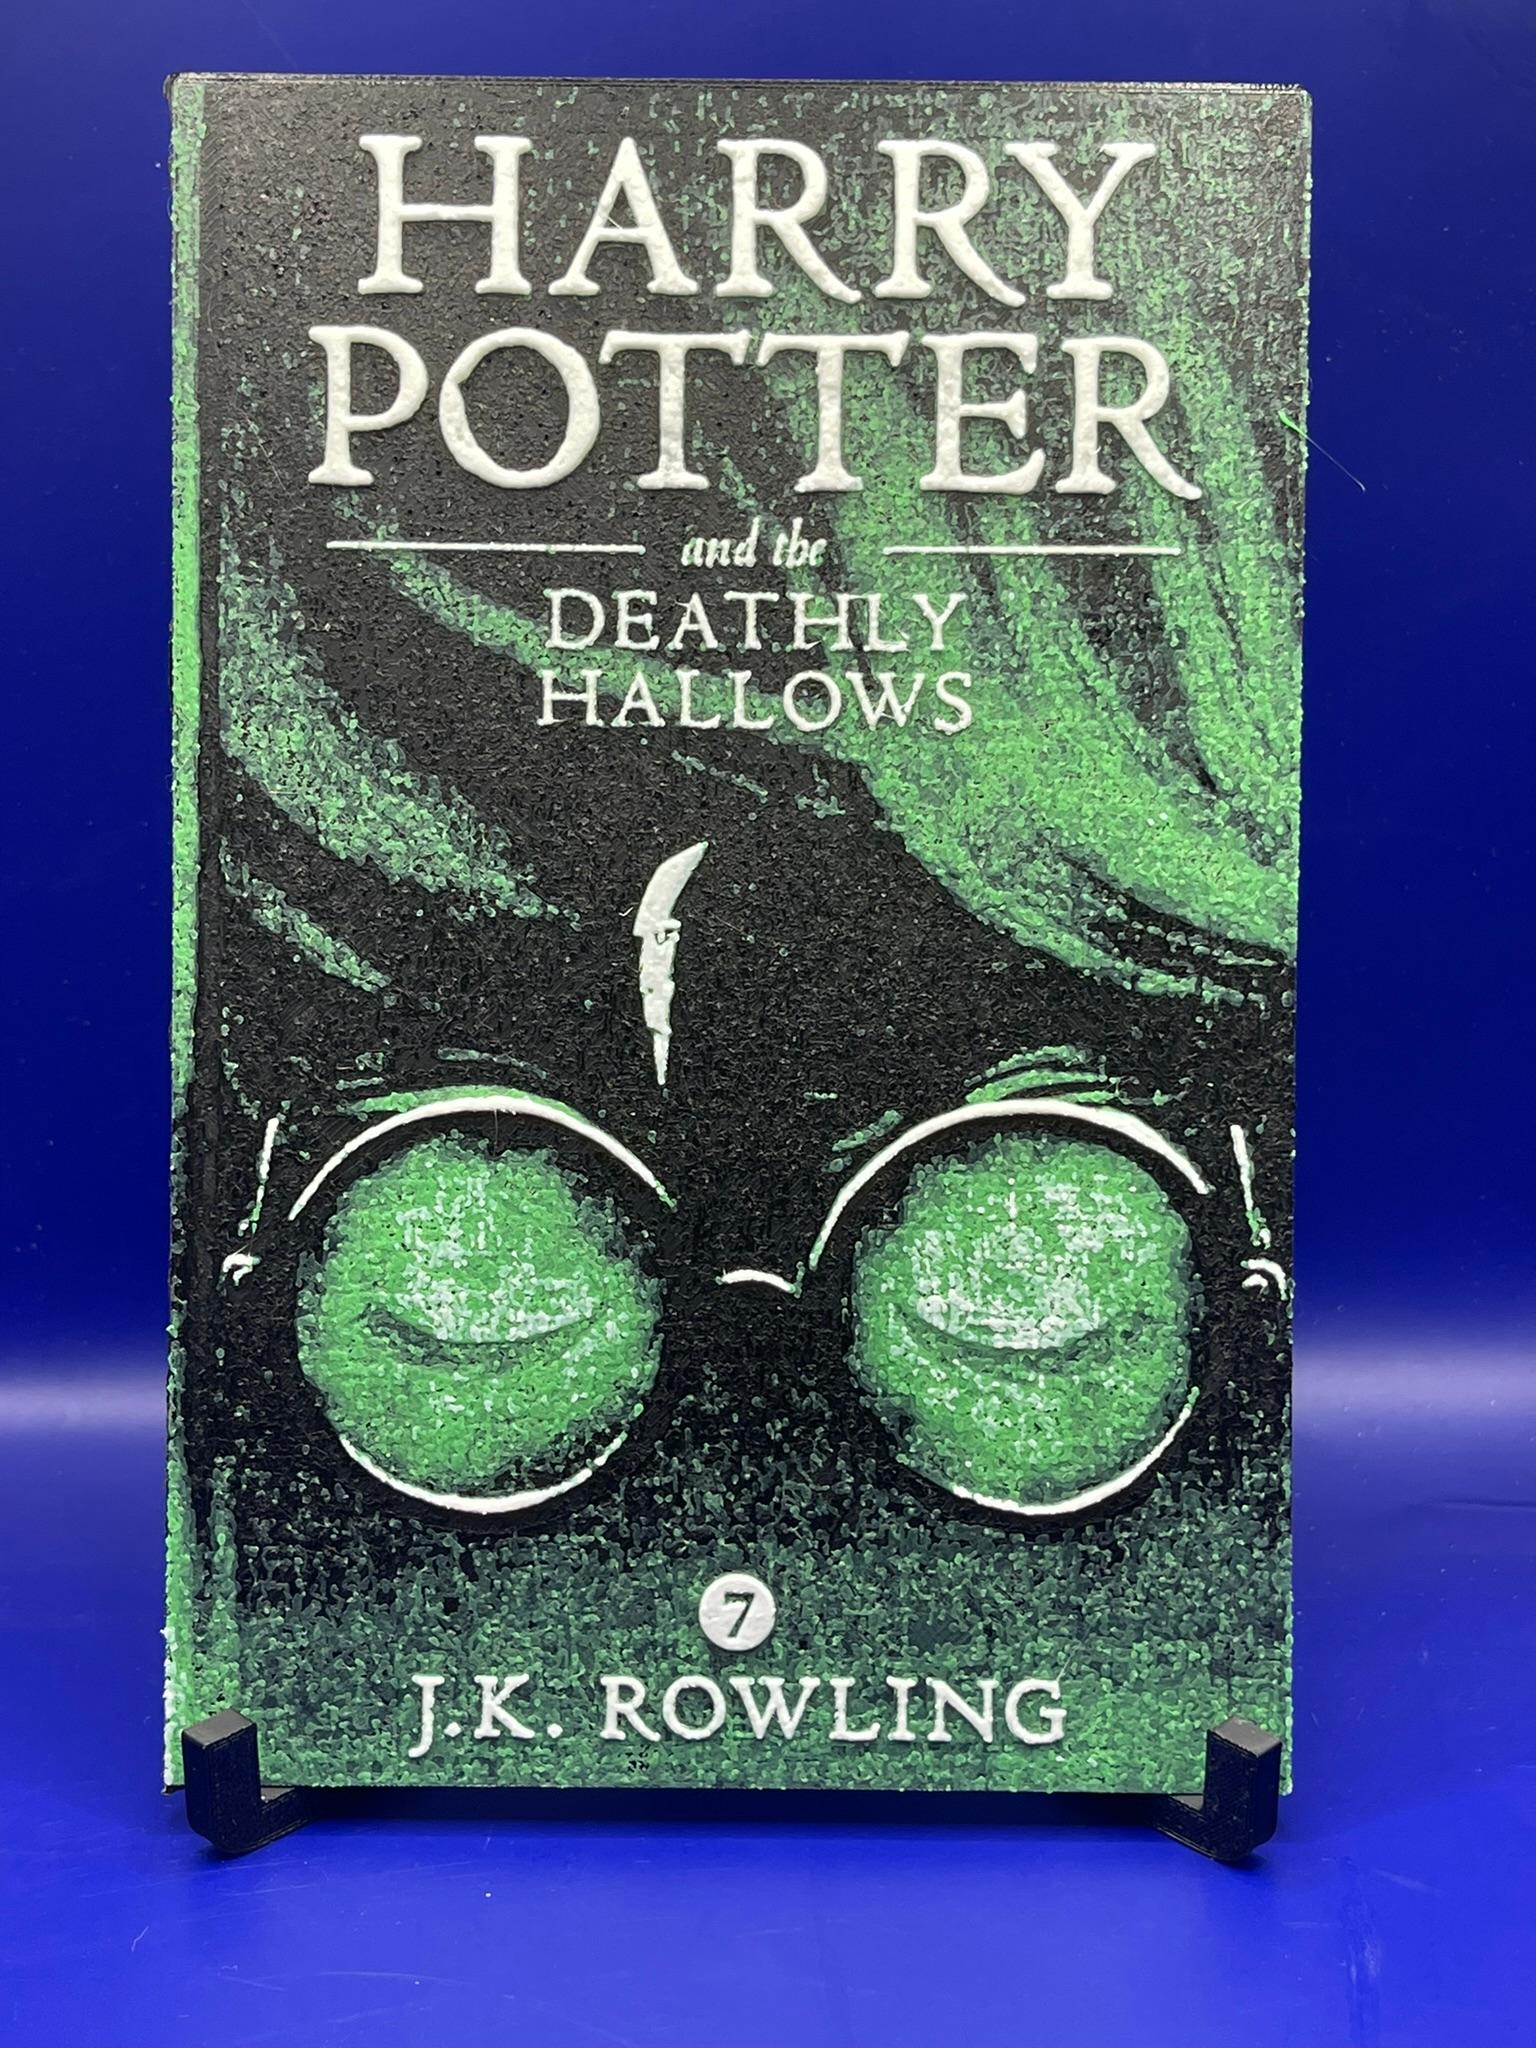 Harry Potter and the Deathly Hallows HueForge Book Cover 3d model